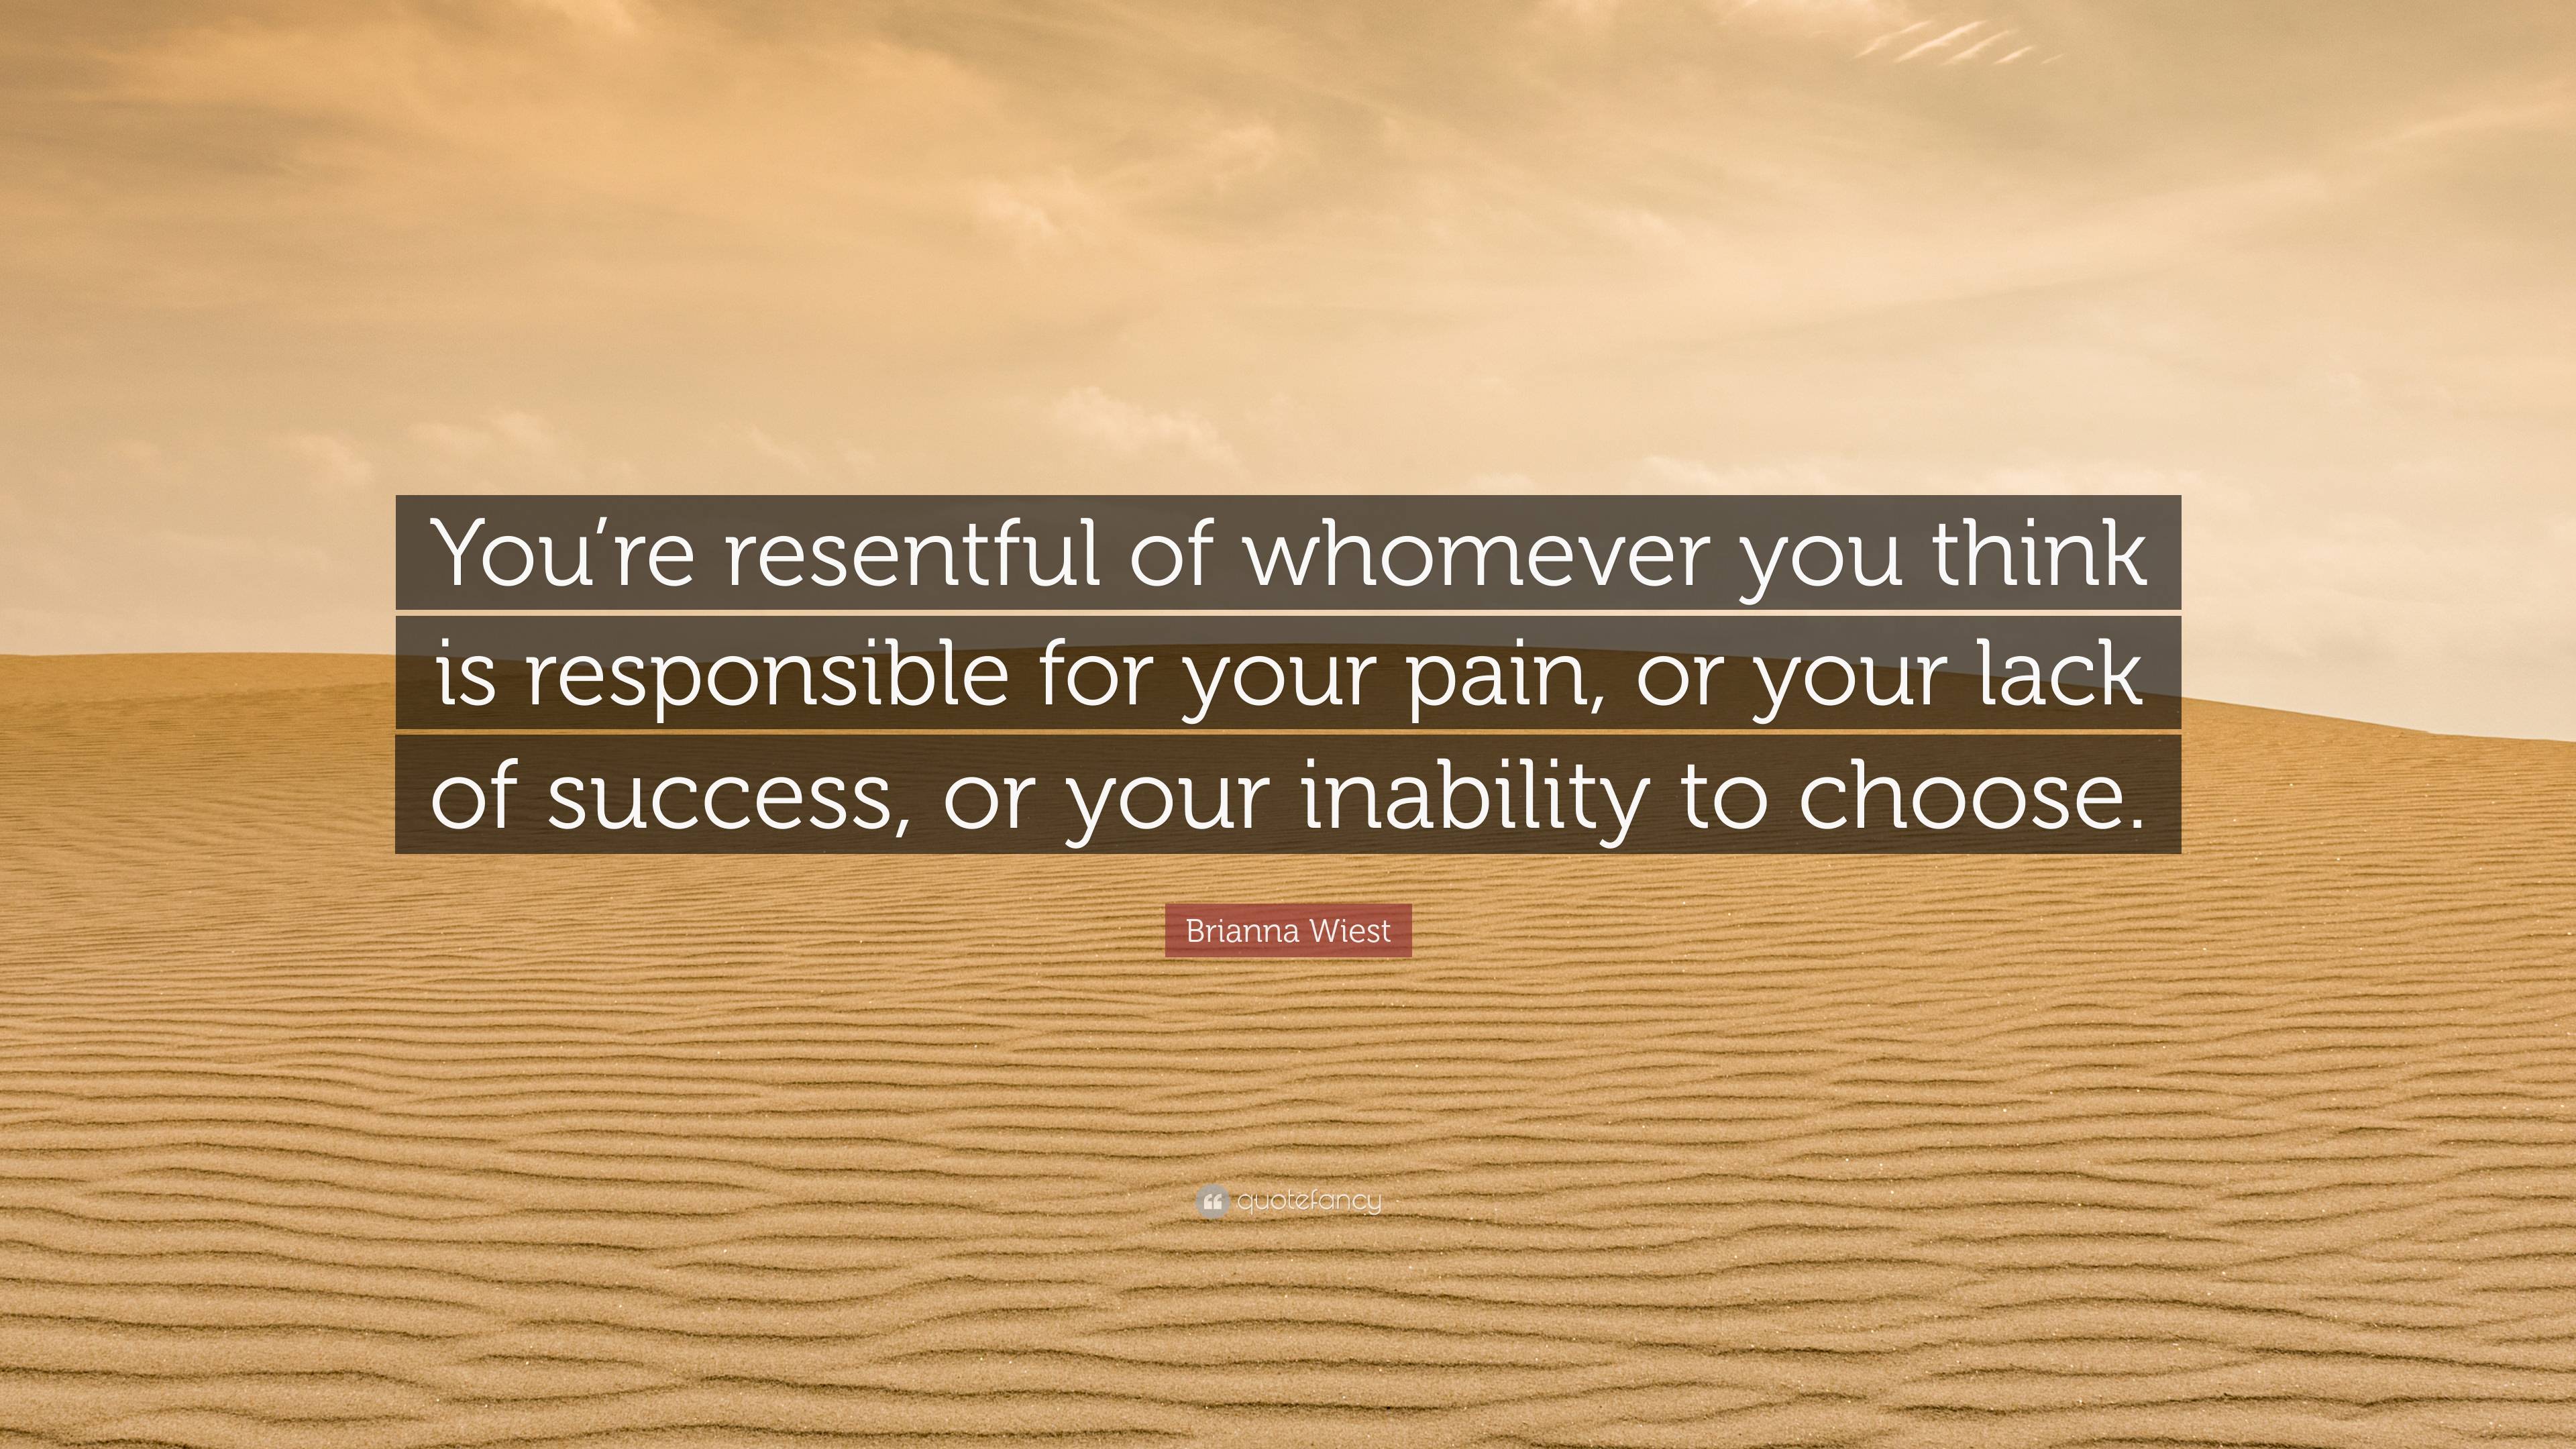 Brianna Wiest Quote: “You’re resentful of whomever you think is ...